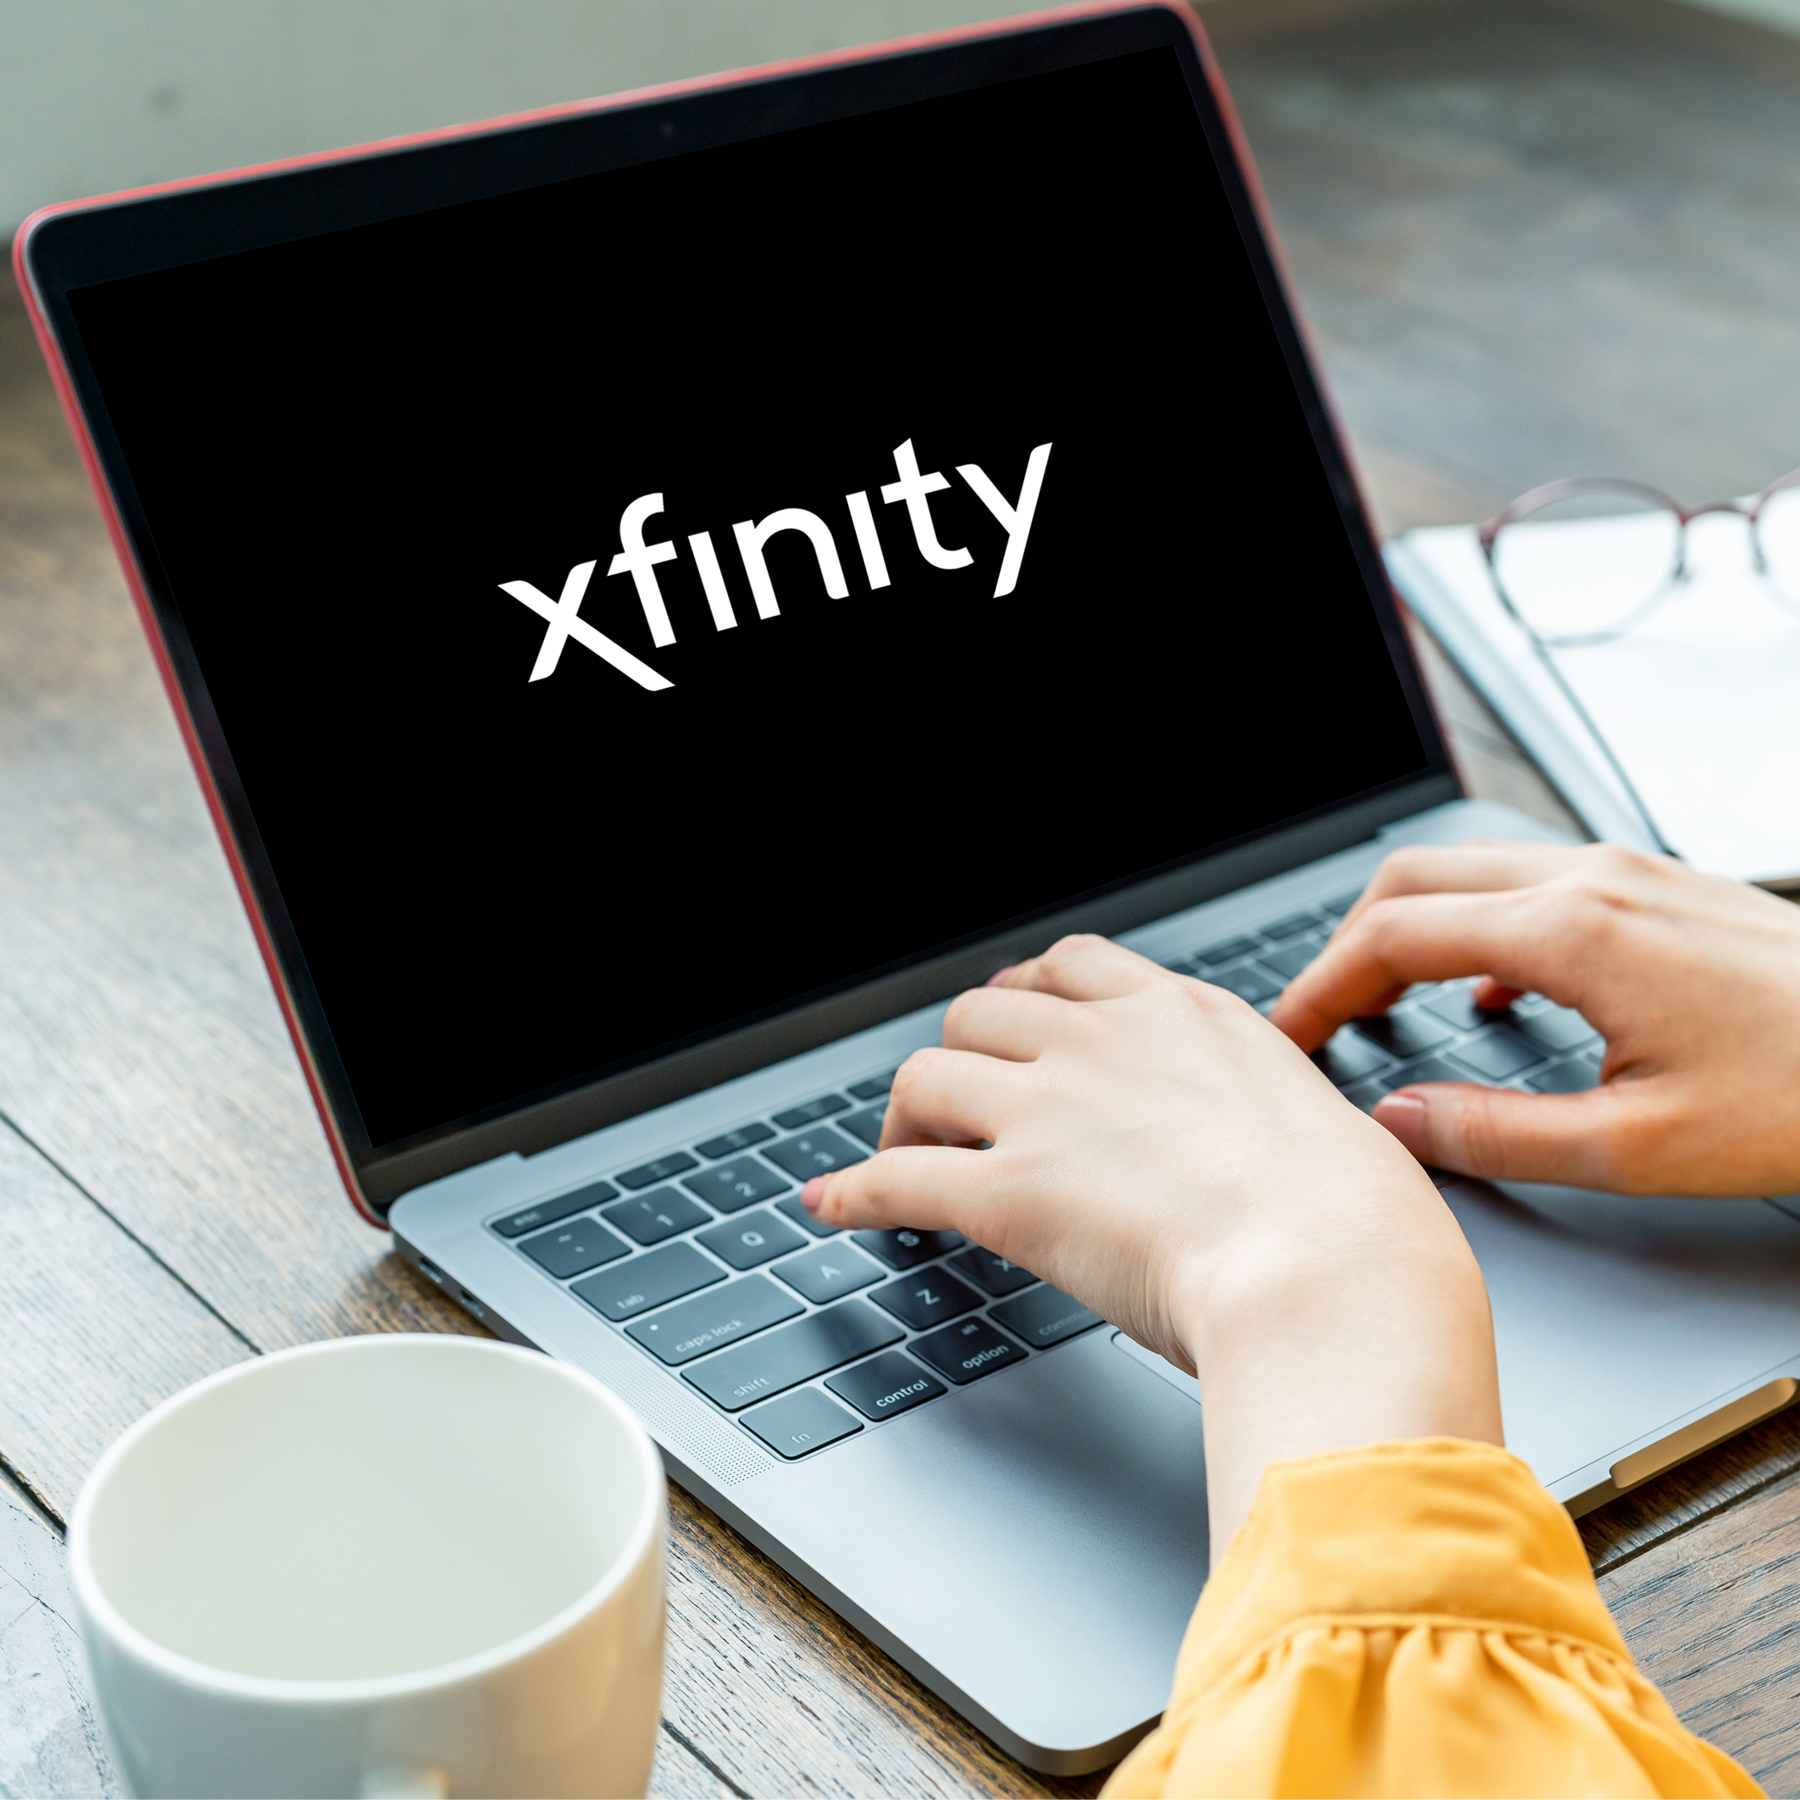 Person typing on laptop with Xfinity logo on screen